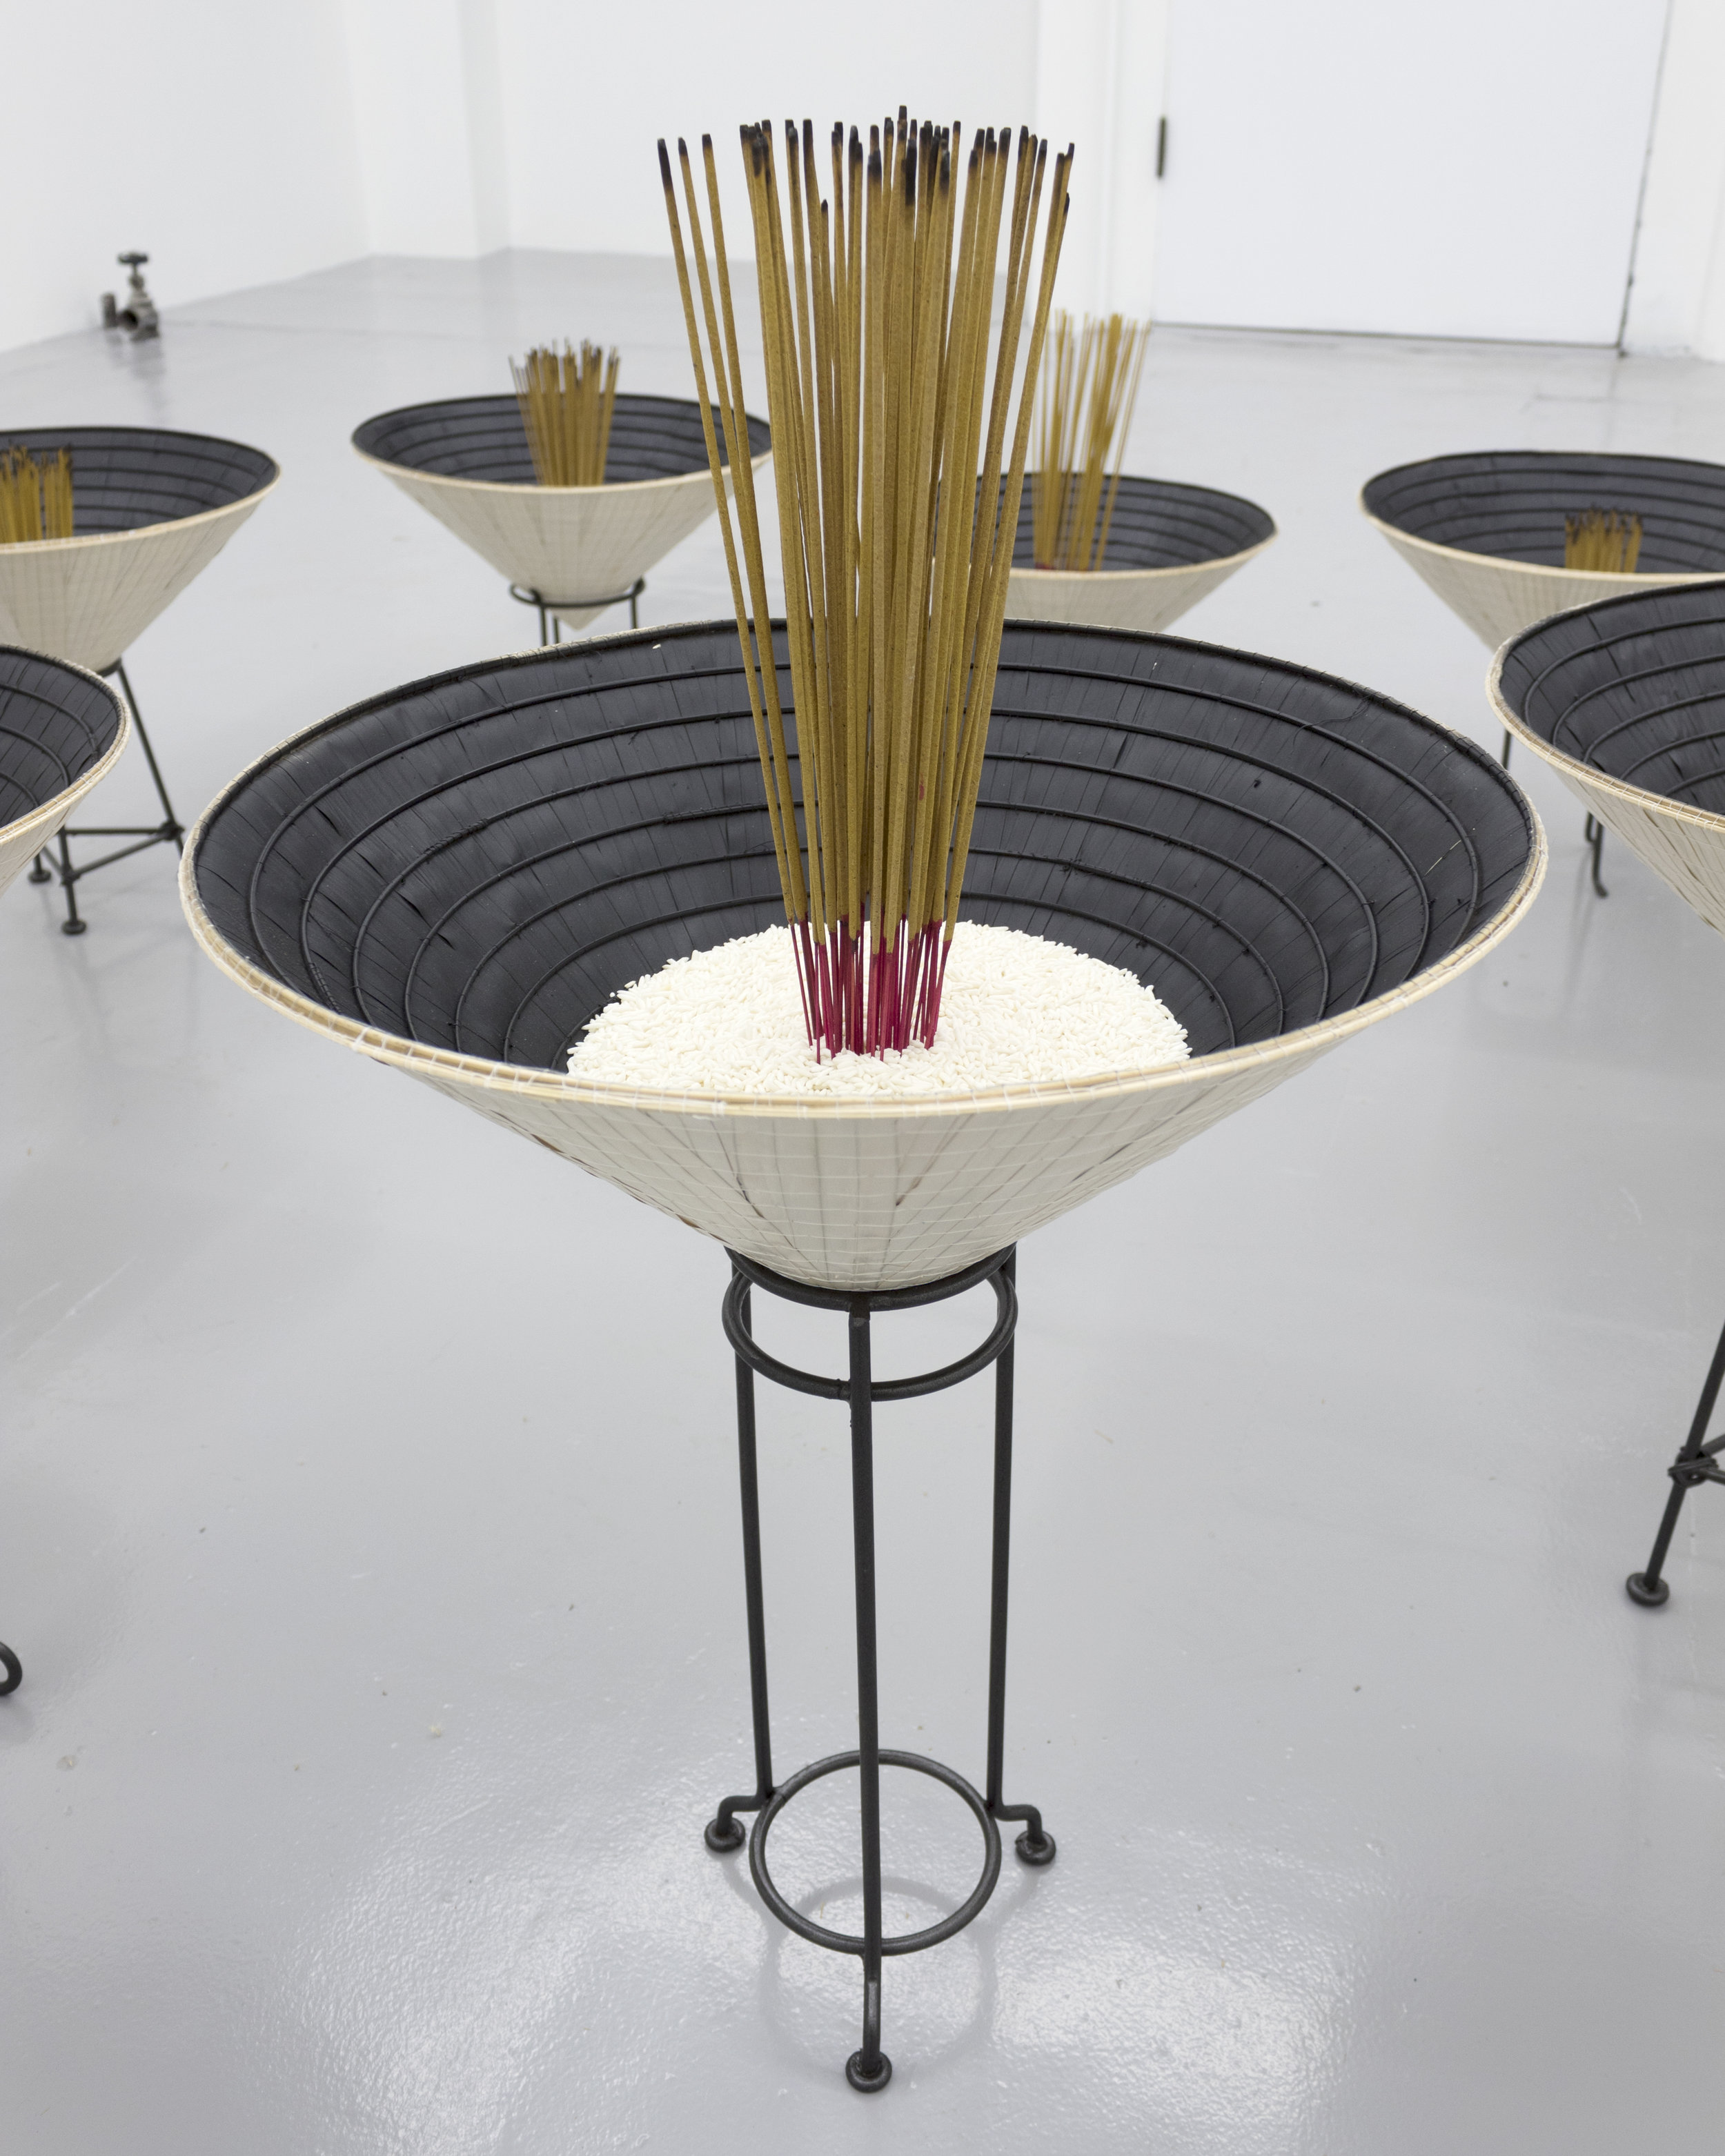  Millian Giang Lien Pham,  Reforge: 9 Phases (Six),  2019. Conical hat, sweet rice, incense, metal stand 